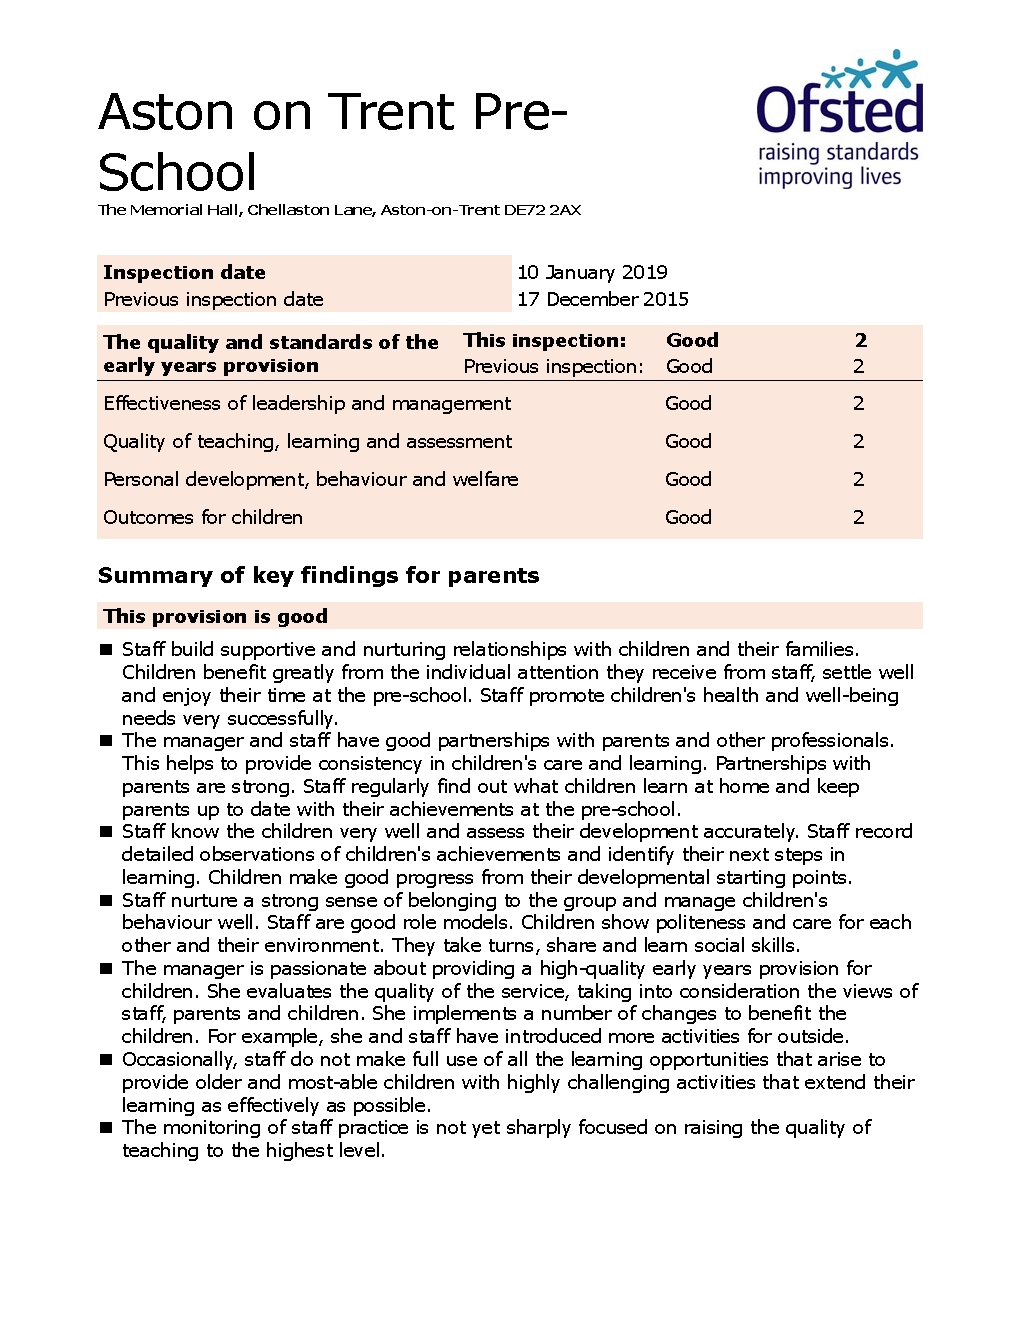 Aot Preschool Ofsted 2019_Page_1.png